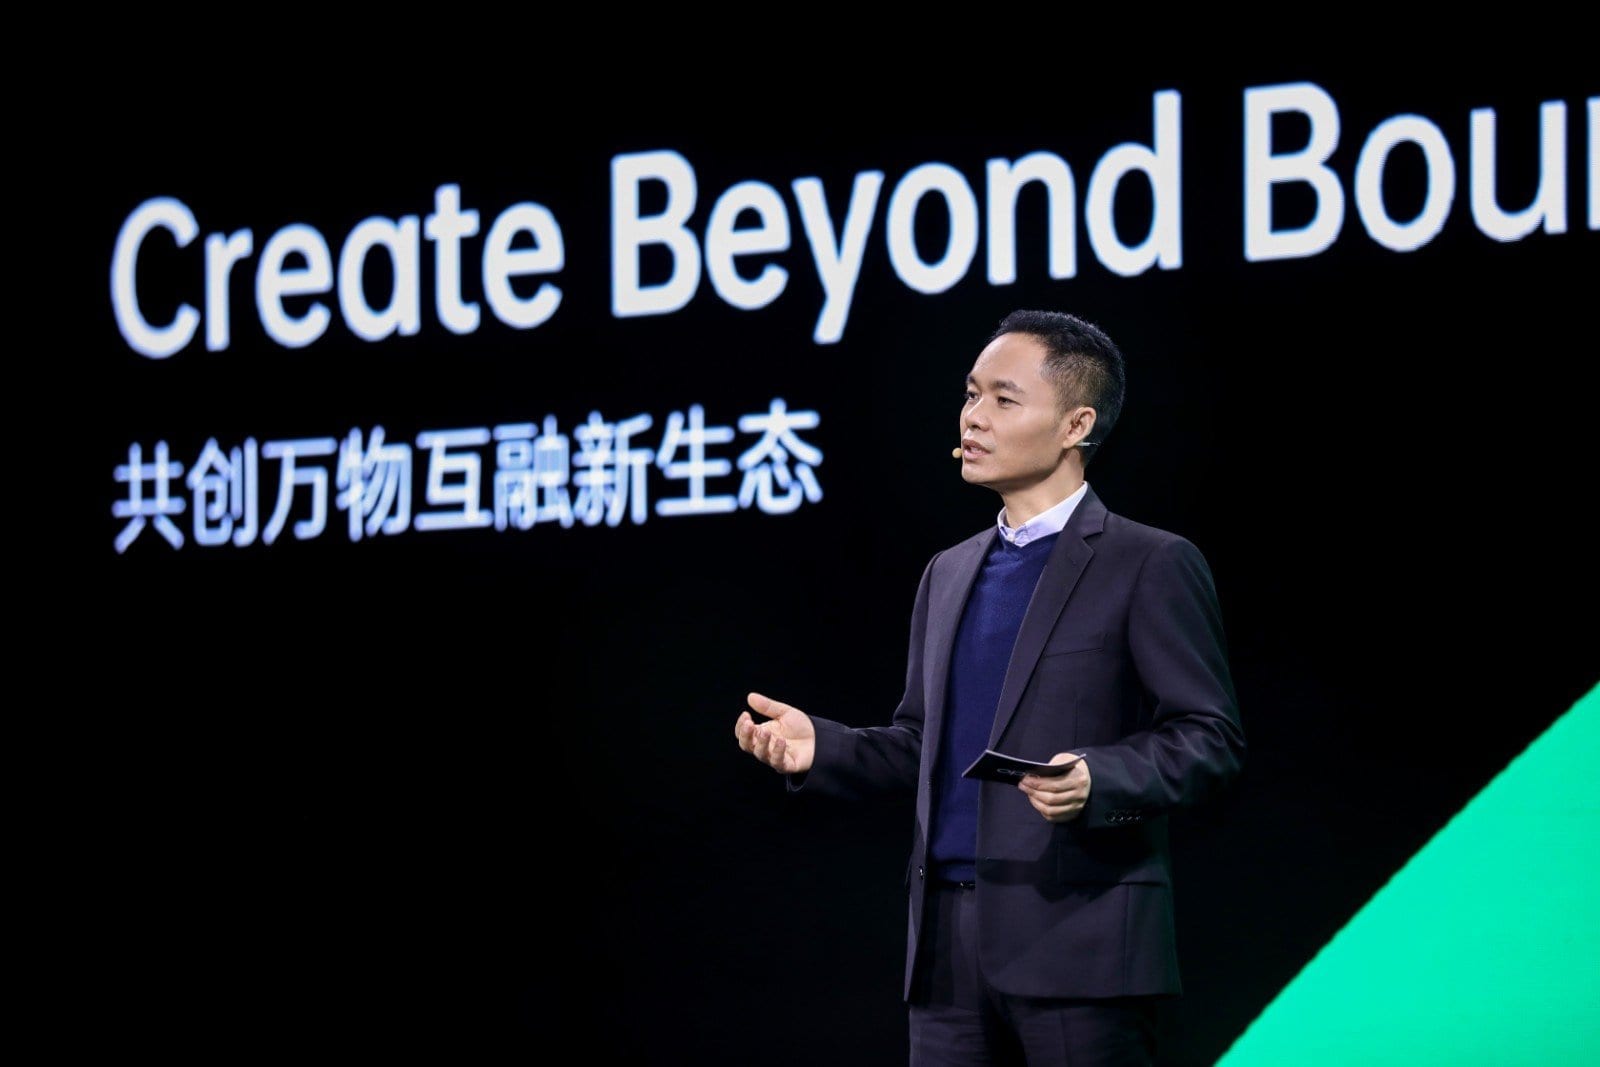 Tony Chen, Founder and CEO of Oppo